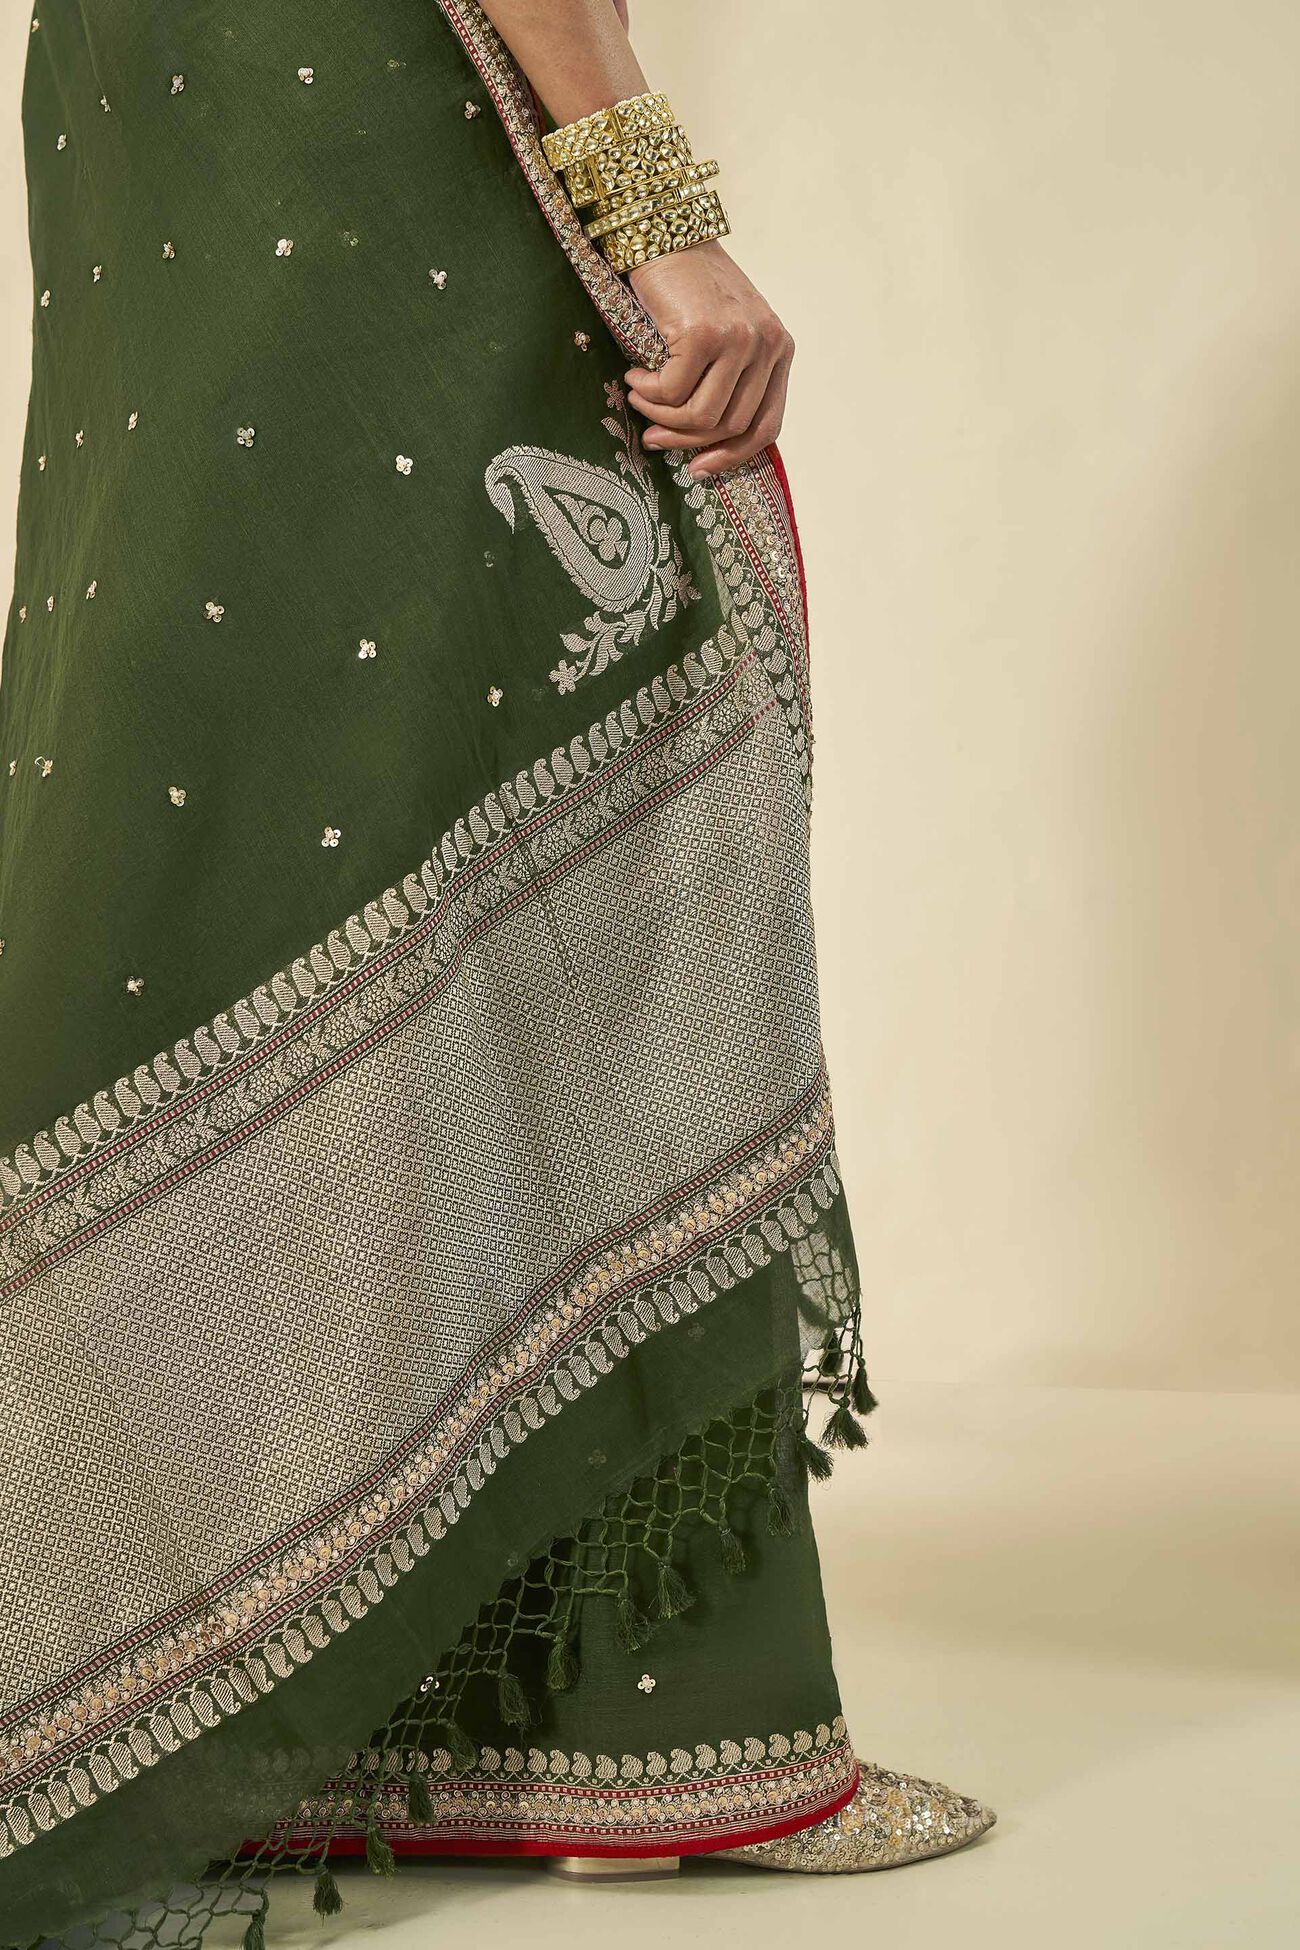 Varshal Embroidered Cotton Saree - Green, Green, image 6